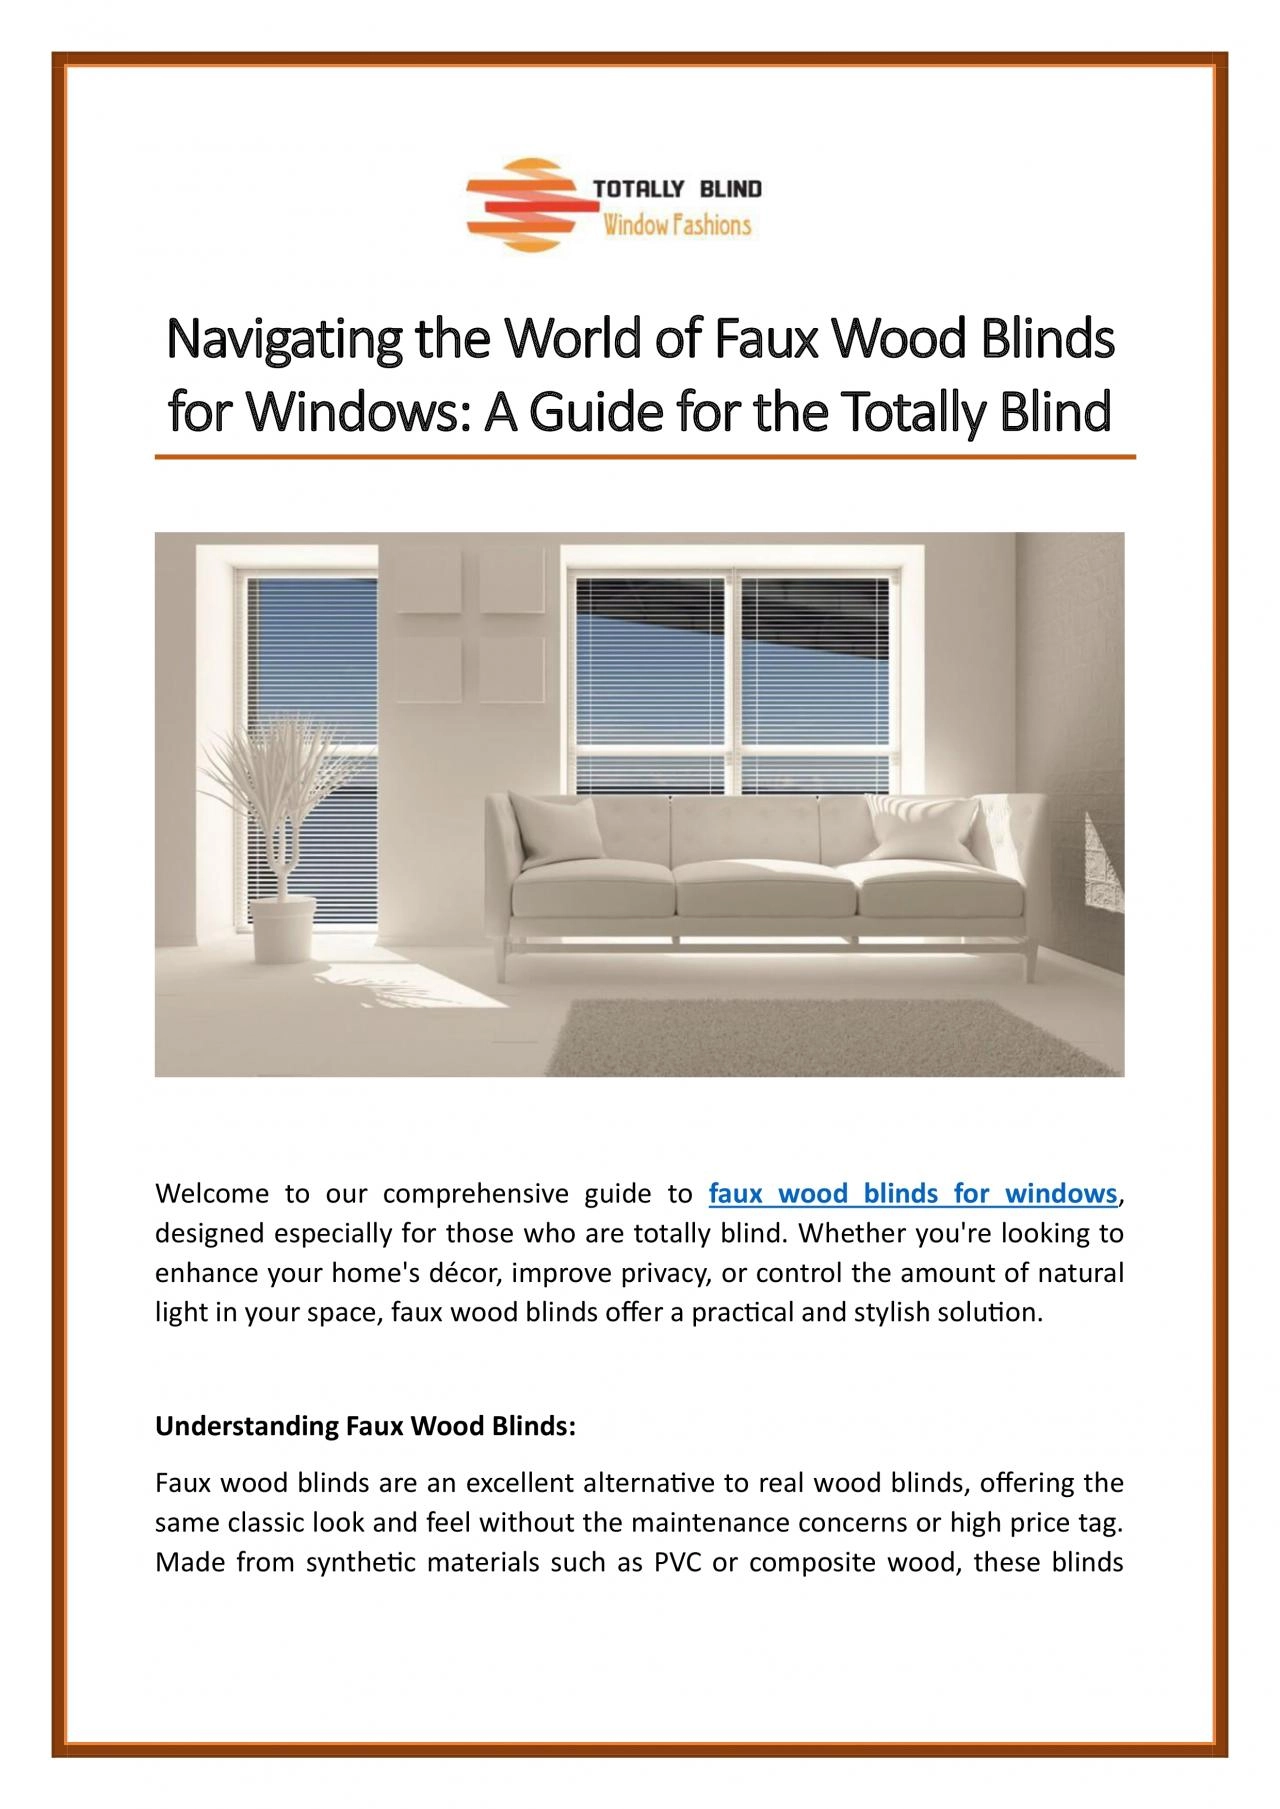 Navigating the World of Faux Wood Blinds for Windows - A Guide for the Totally Blind